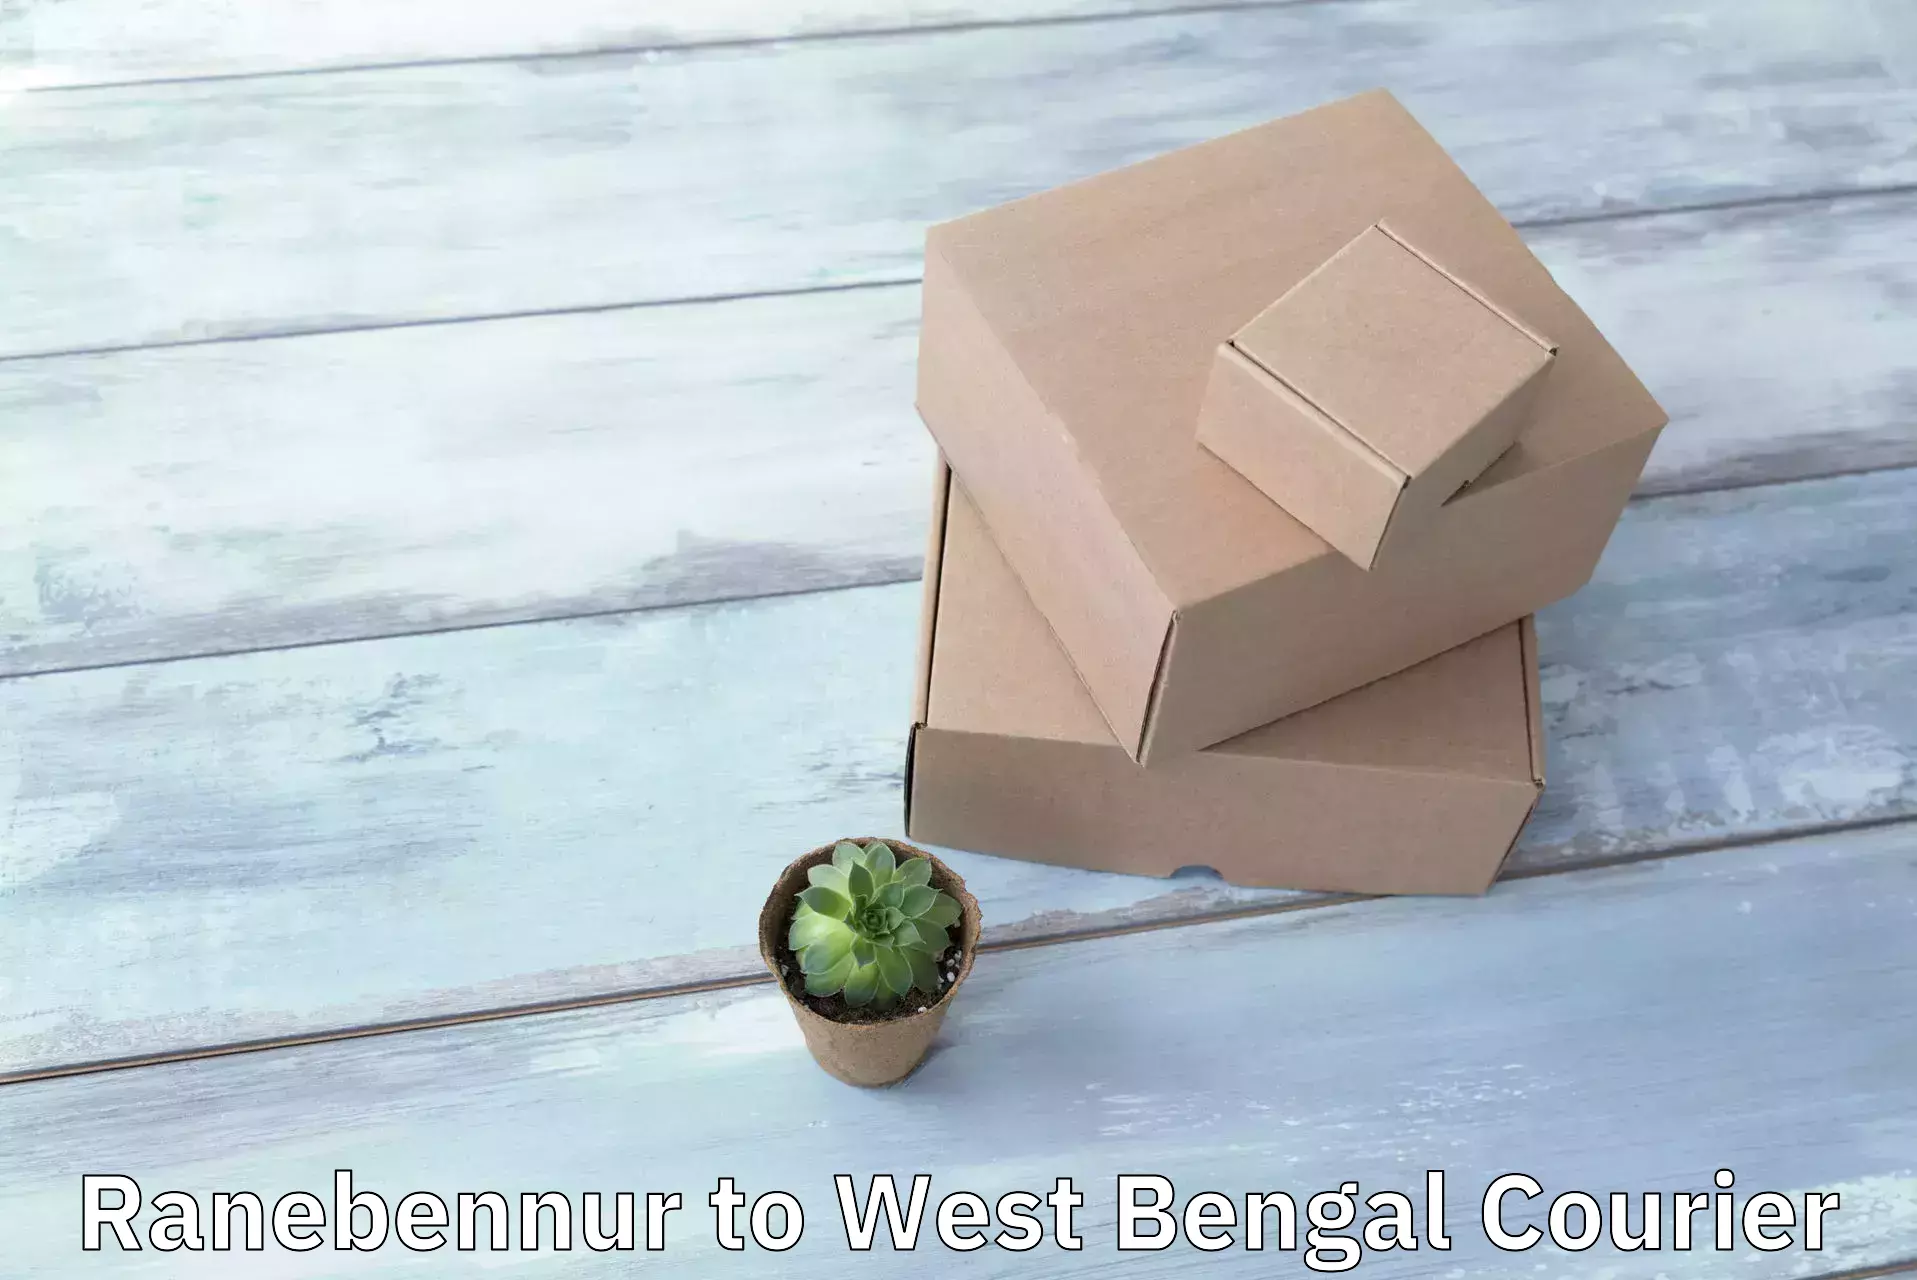 Enhanced shipping experience Ranebennur to West Bengal